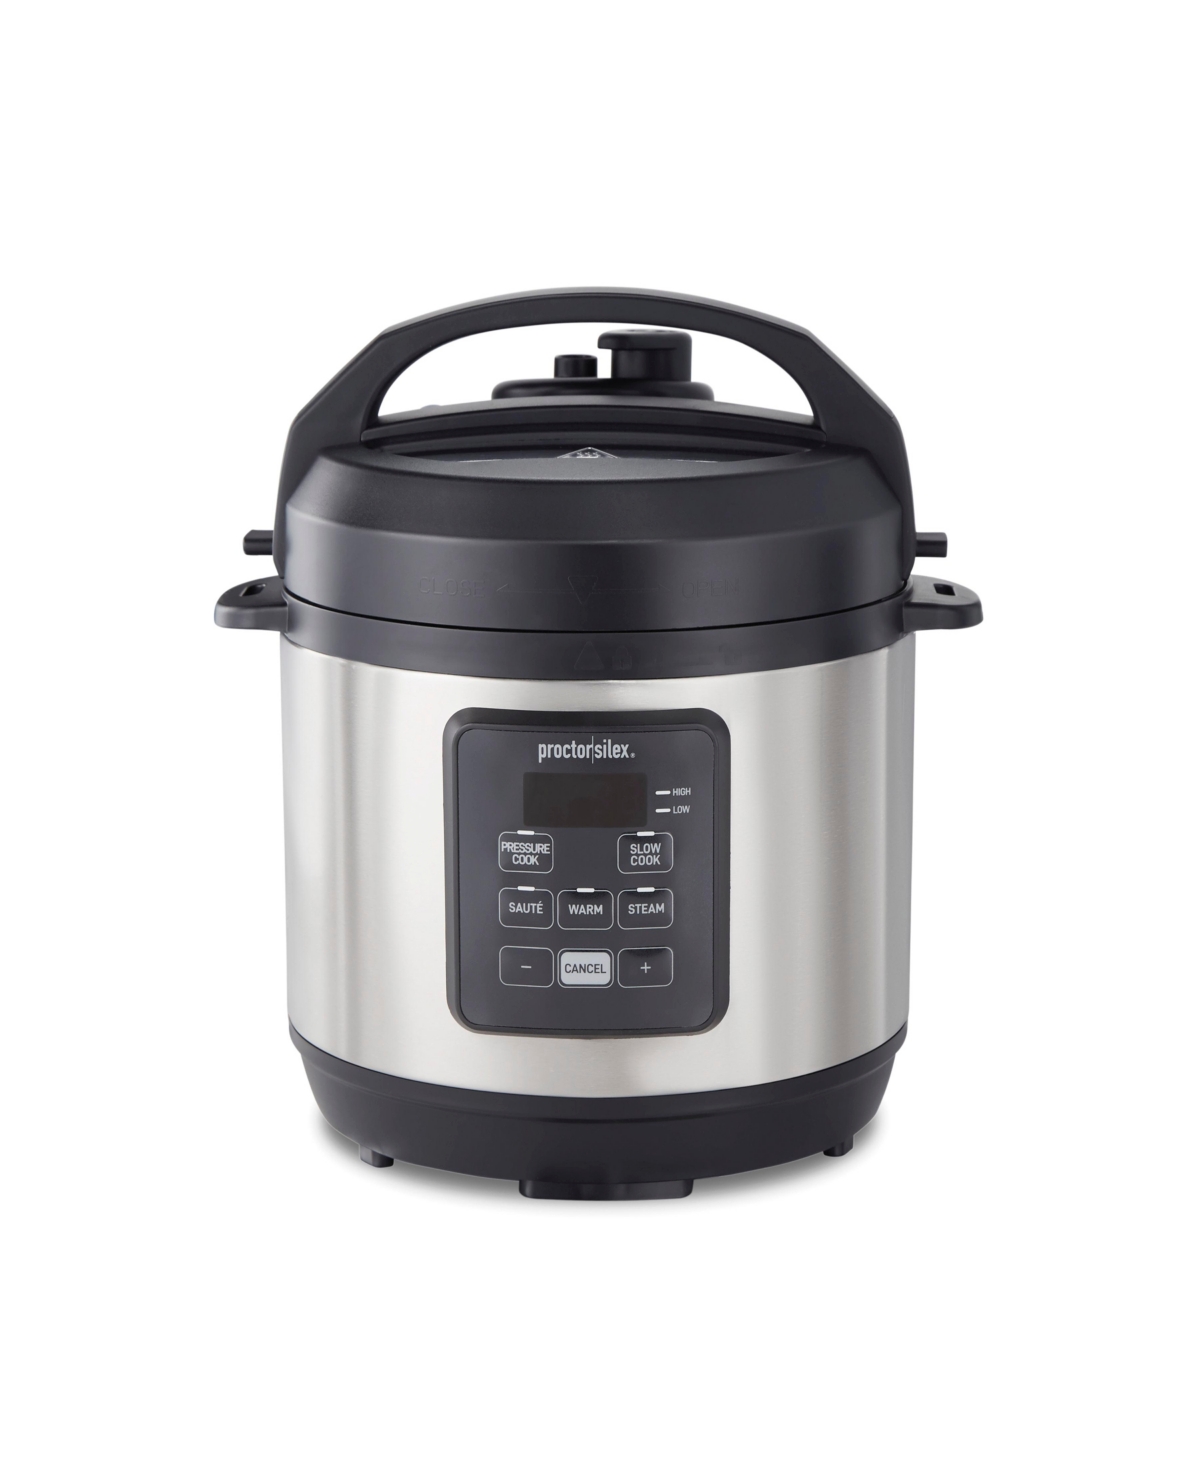 Proctor Silex 3 Quart Simplicity Pressure Cooker In Black And Stainless Steel